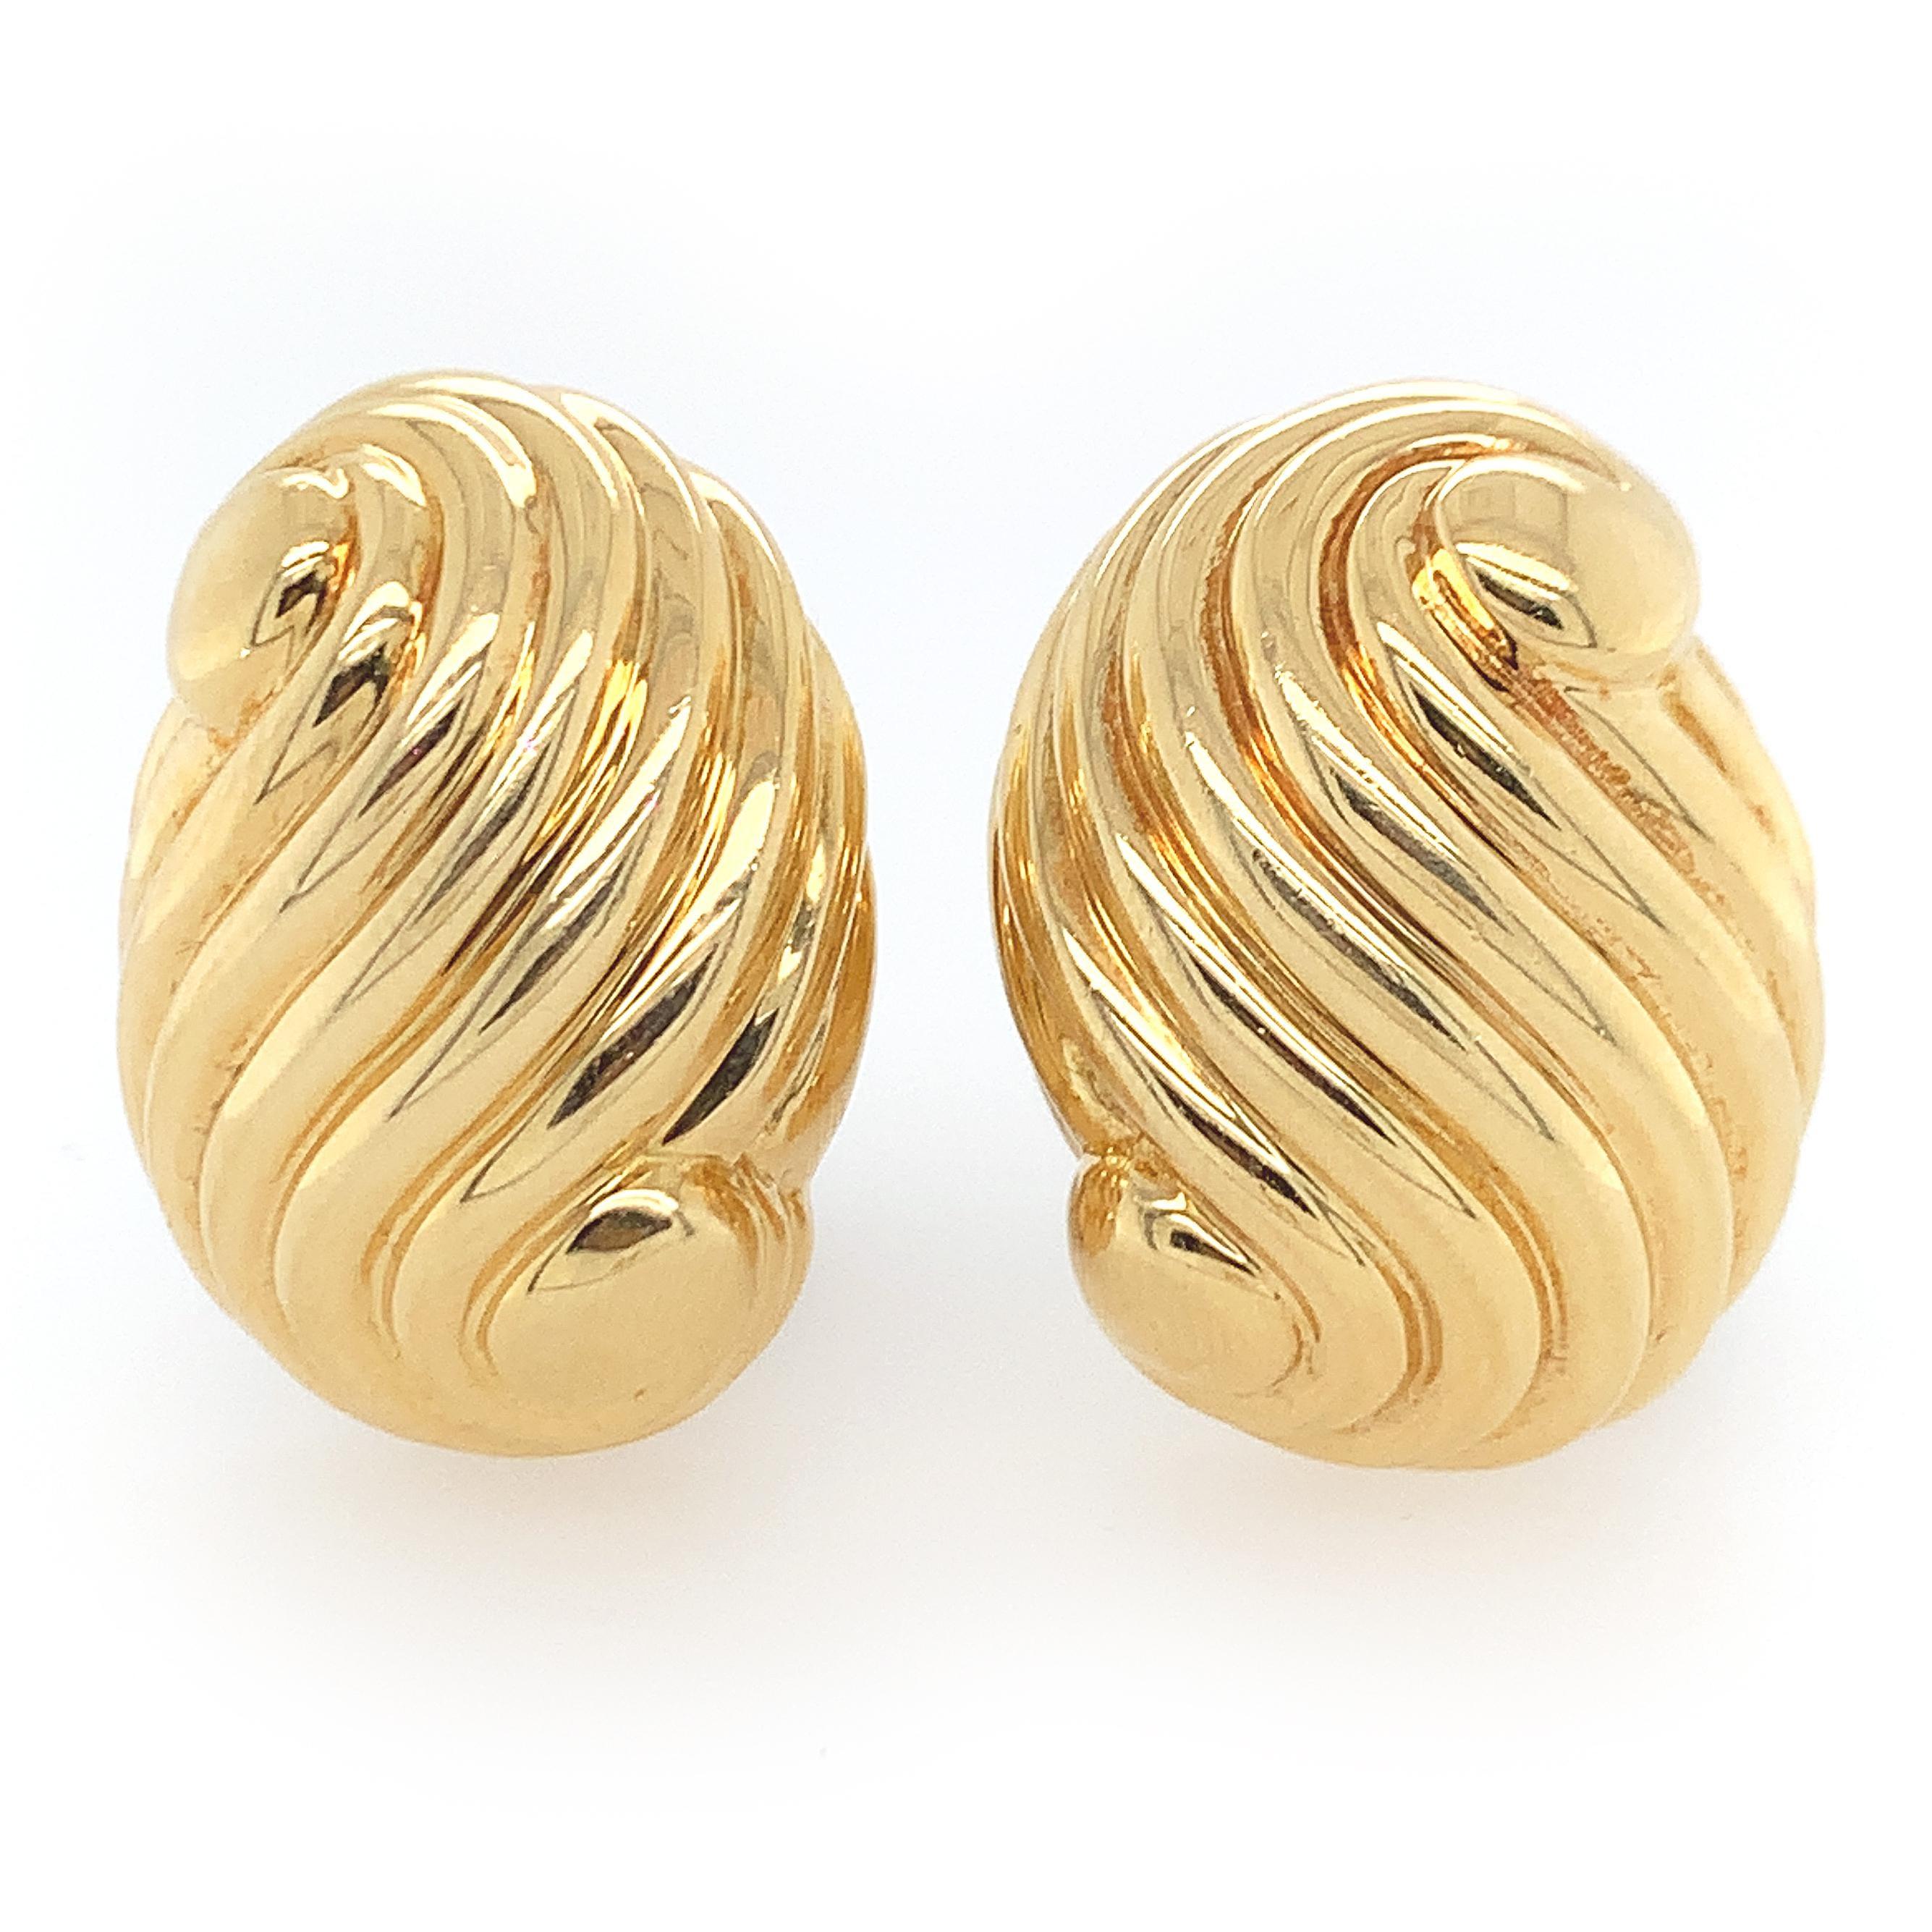 Webb Swril Gold Earclips In Excellent Condition For Sale In New York, NY